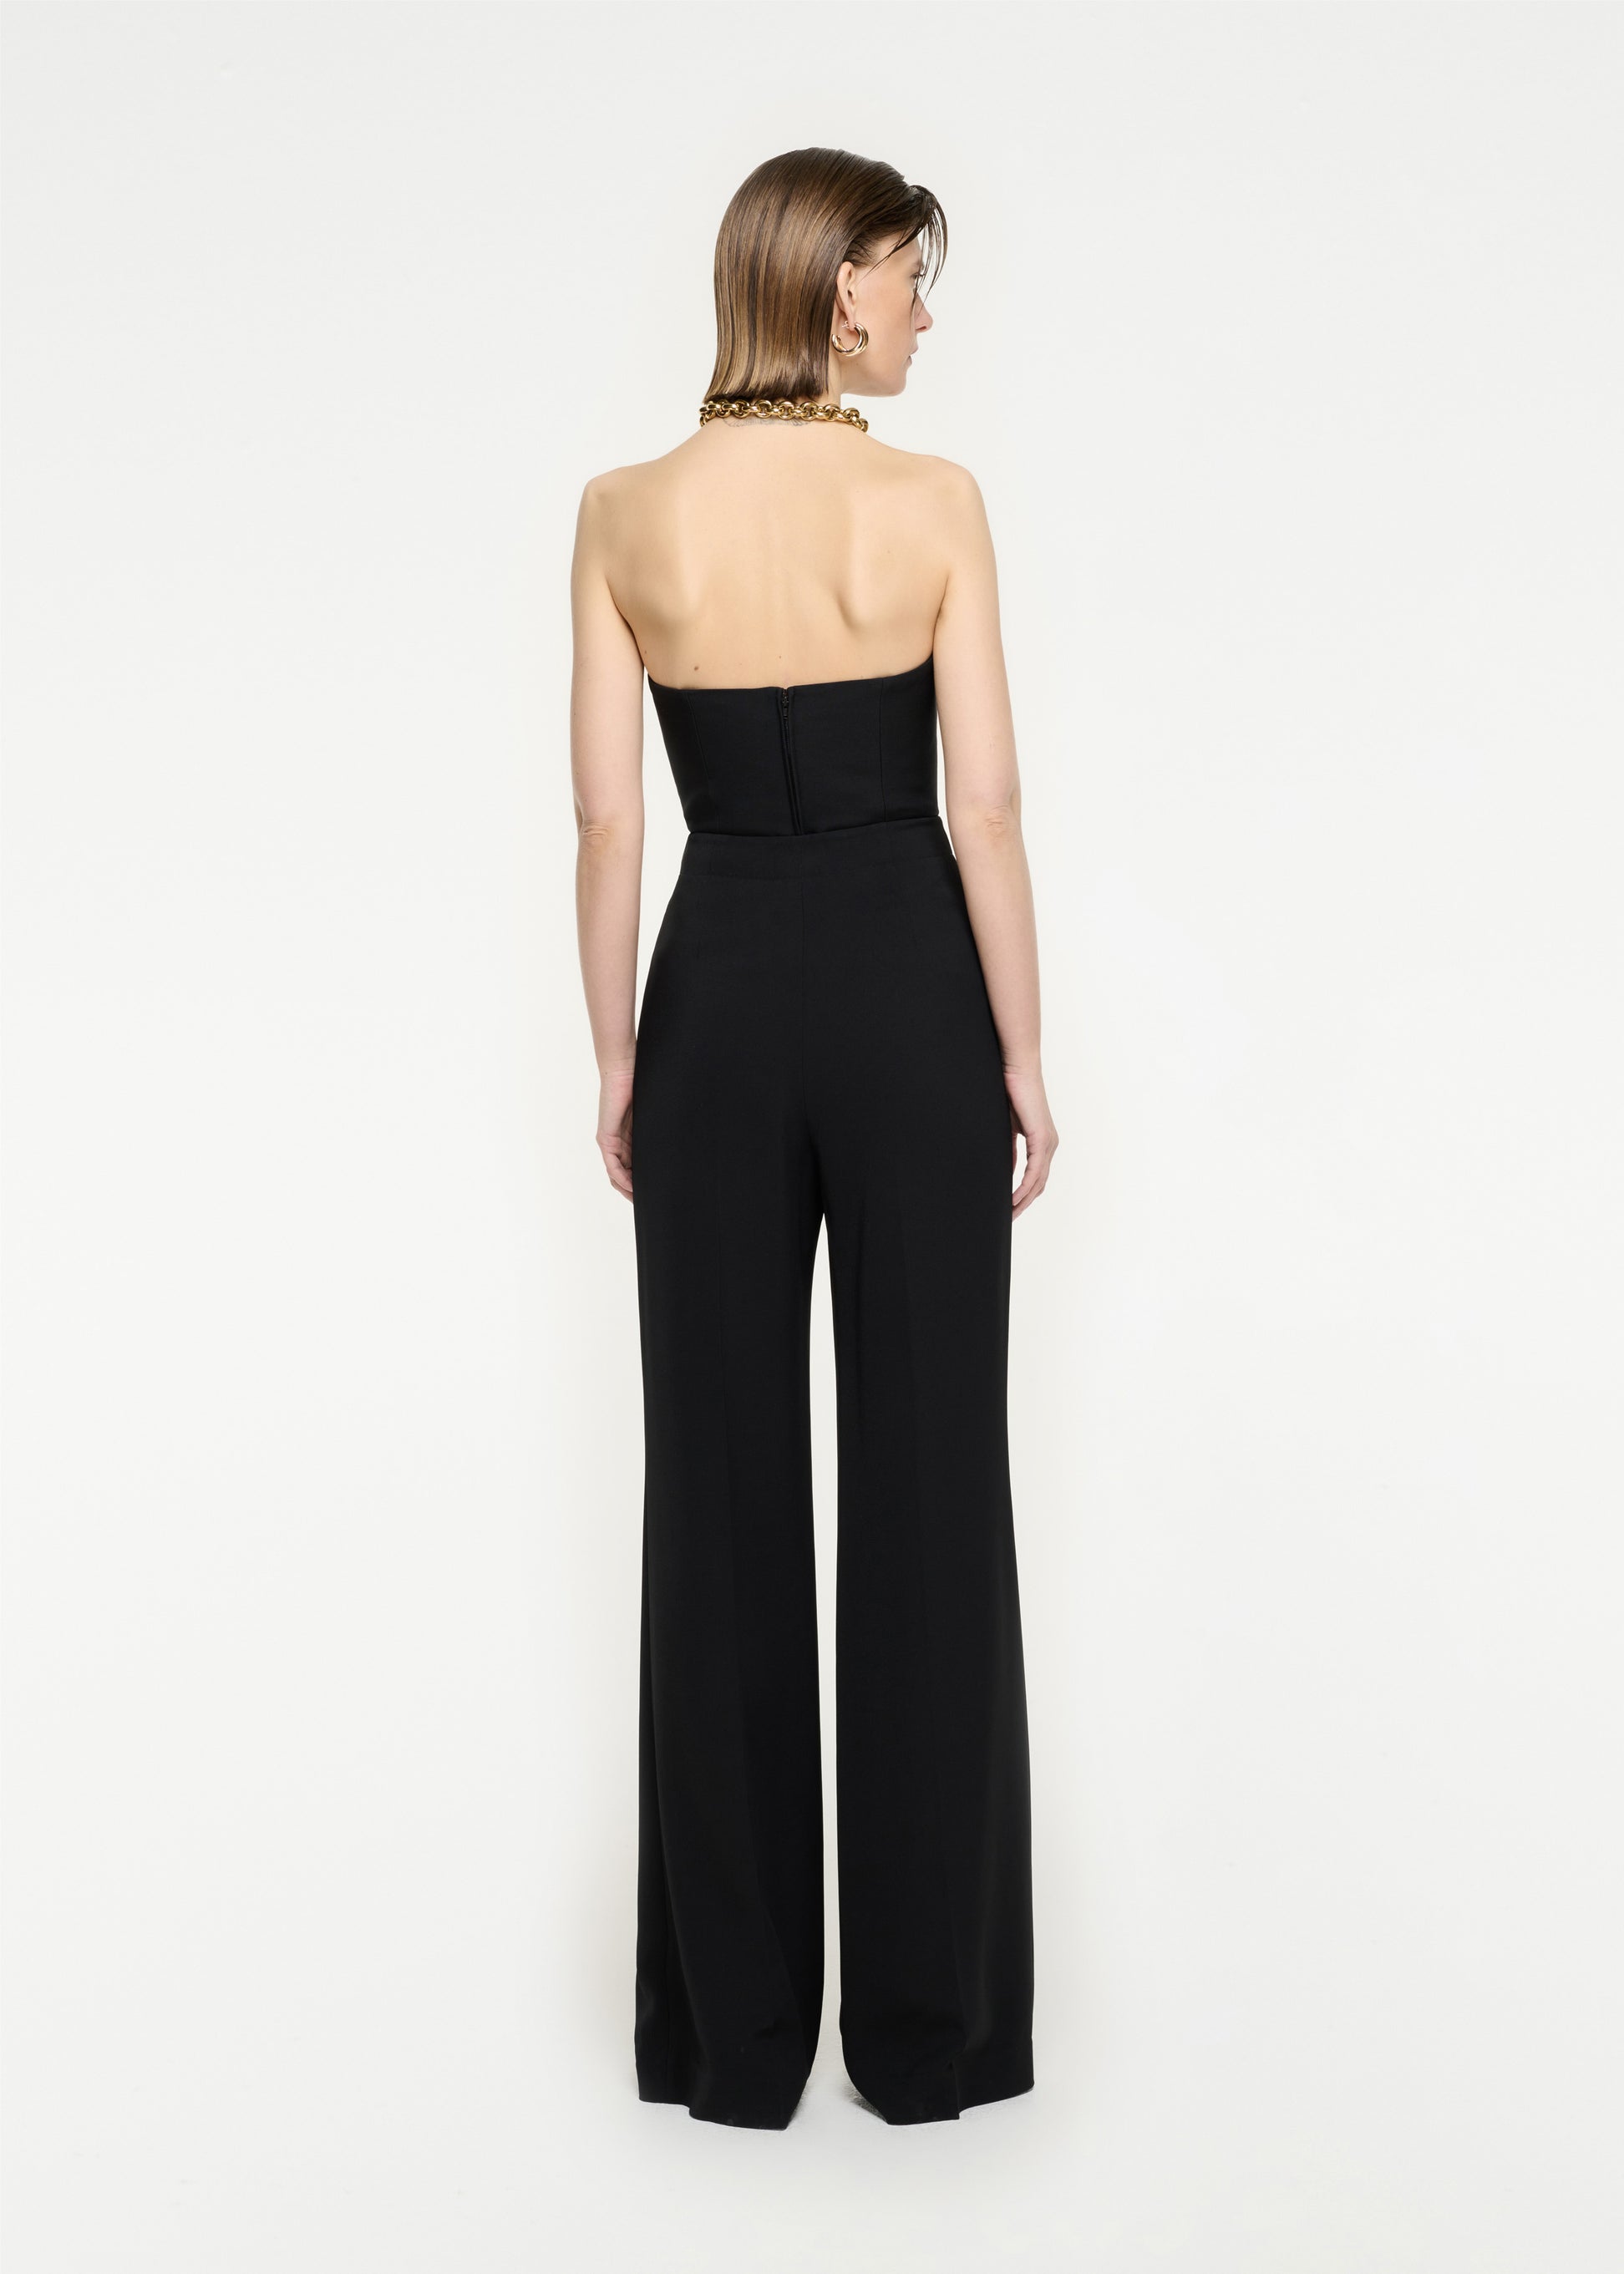 The back of a woman wearing the Strapless Wool Silk Top in Black